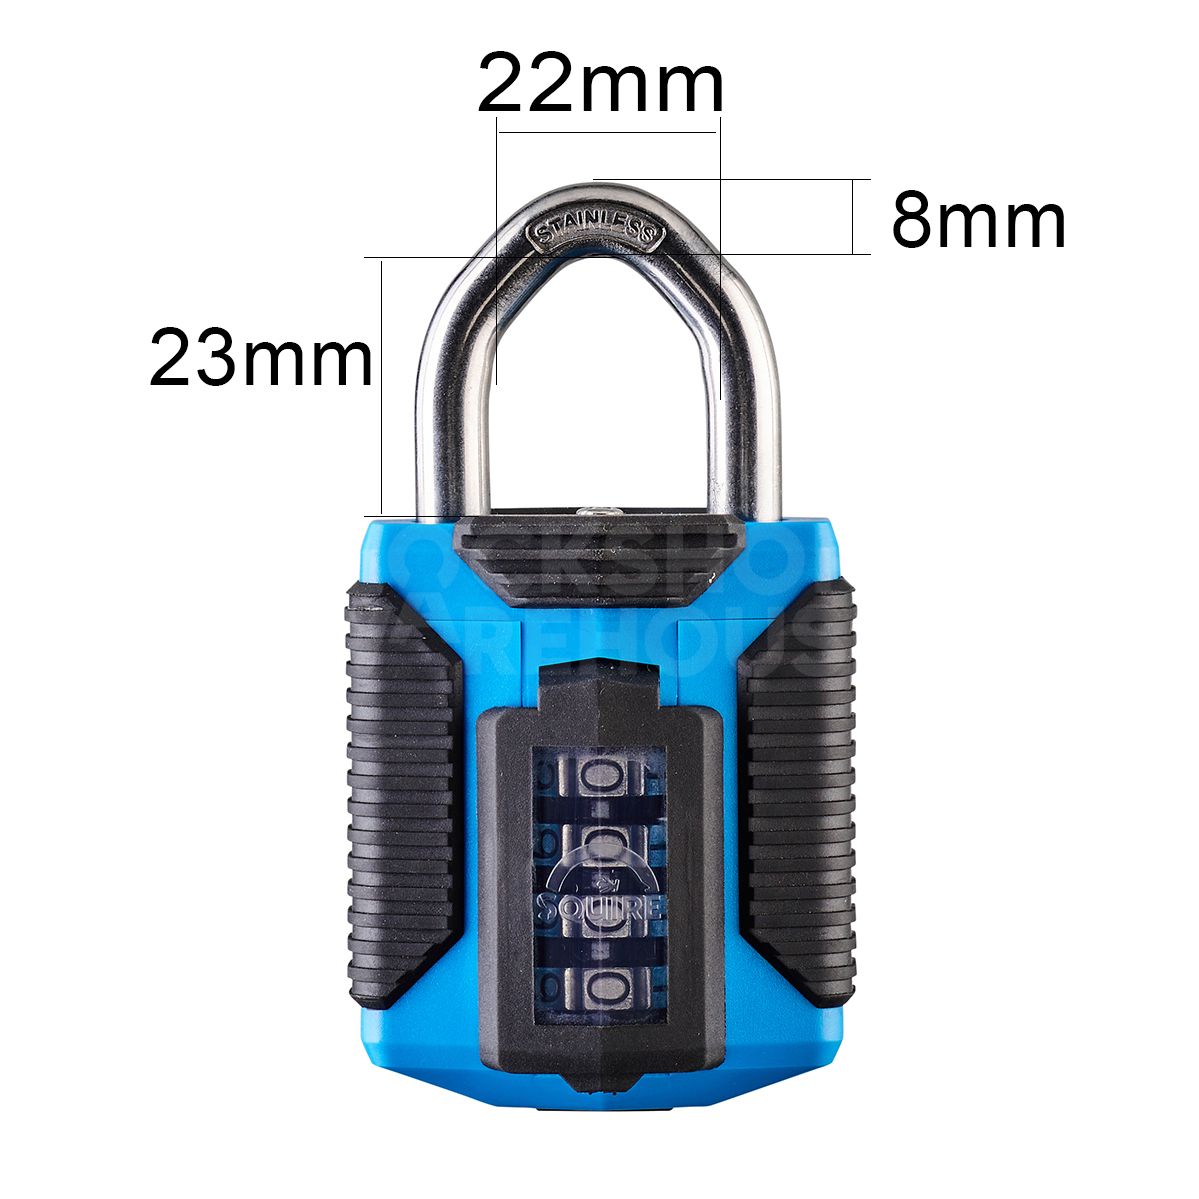 Dimensions Image: Squire CP50 - ATLS - All Terrain Padlock - Stainless Steel Shackle